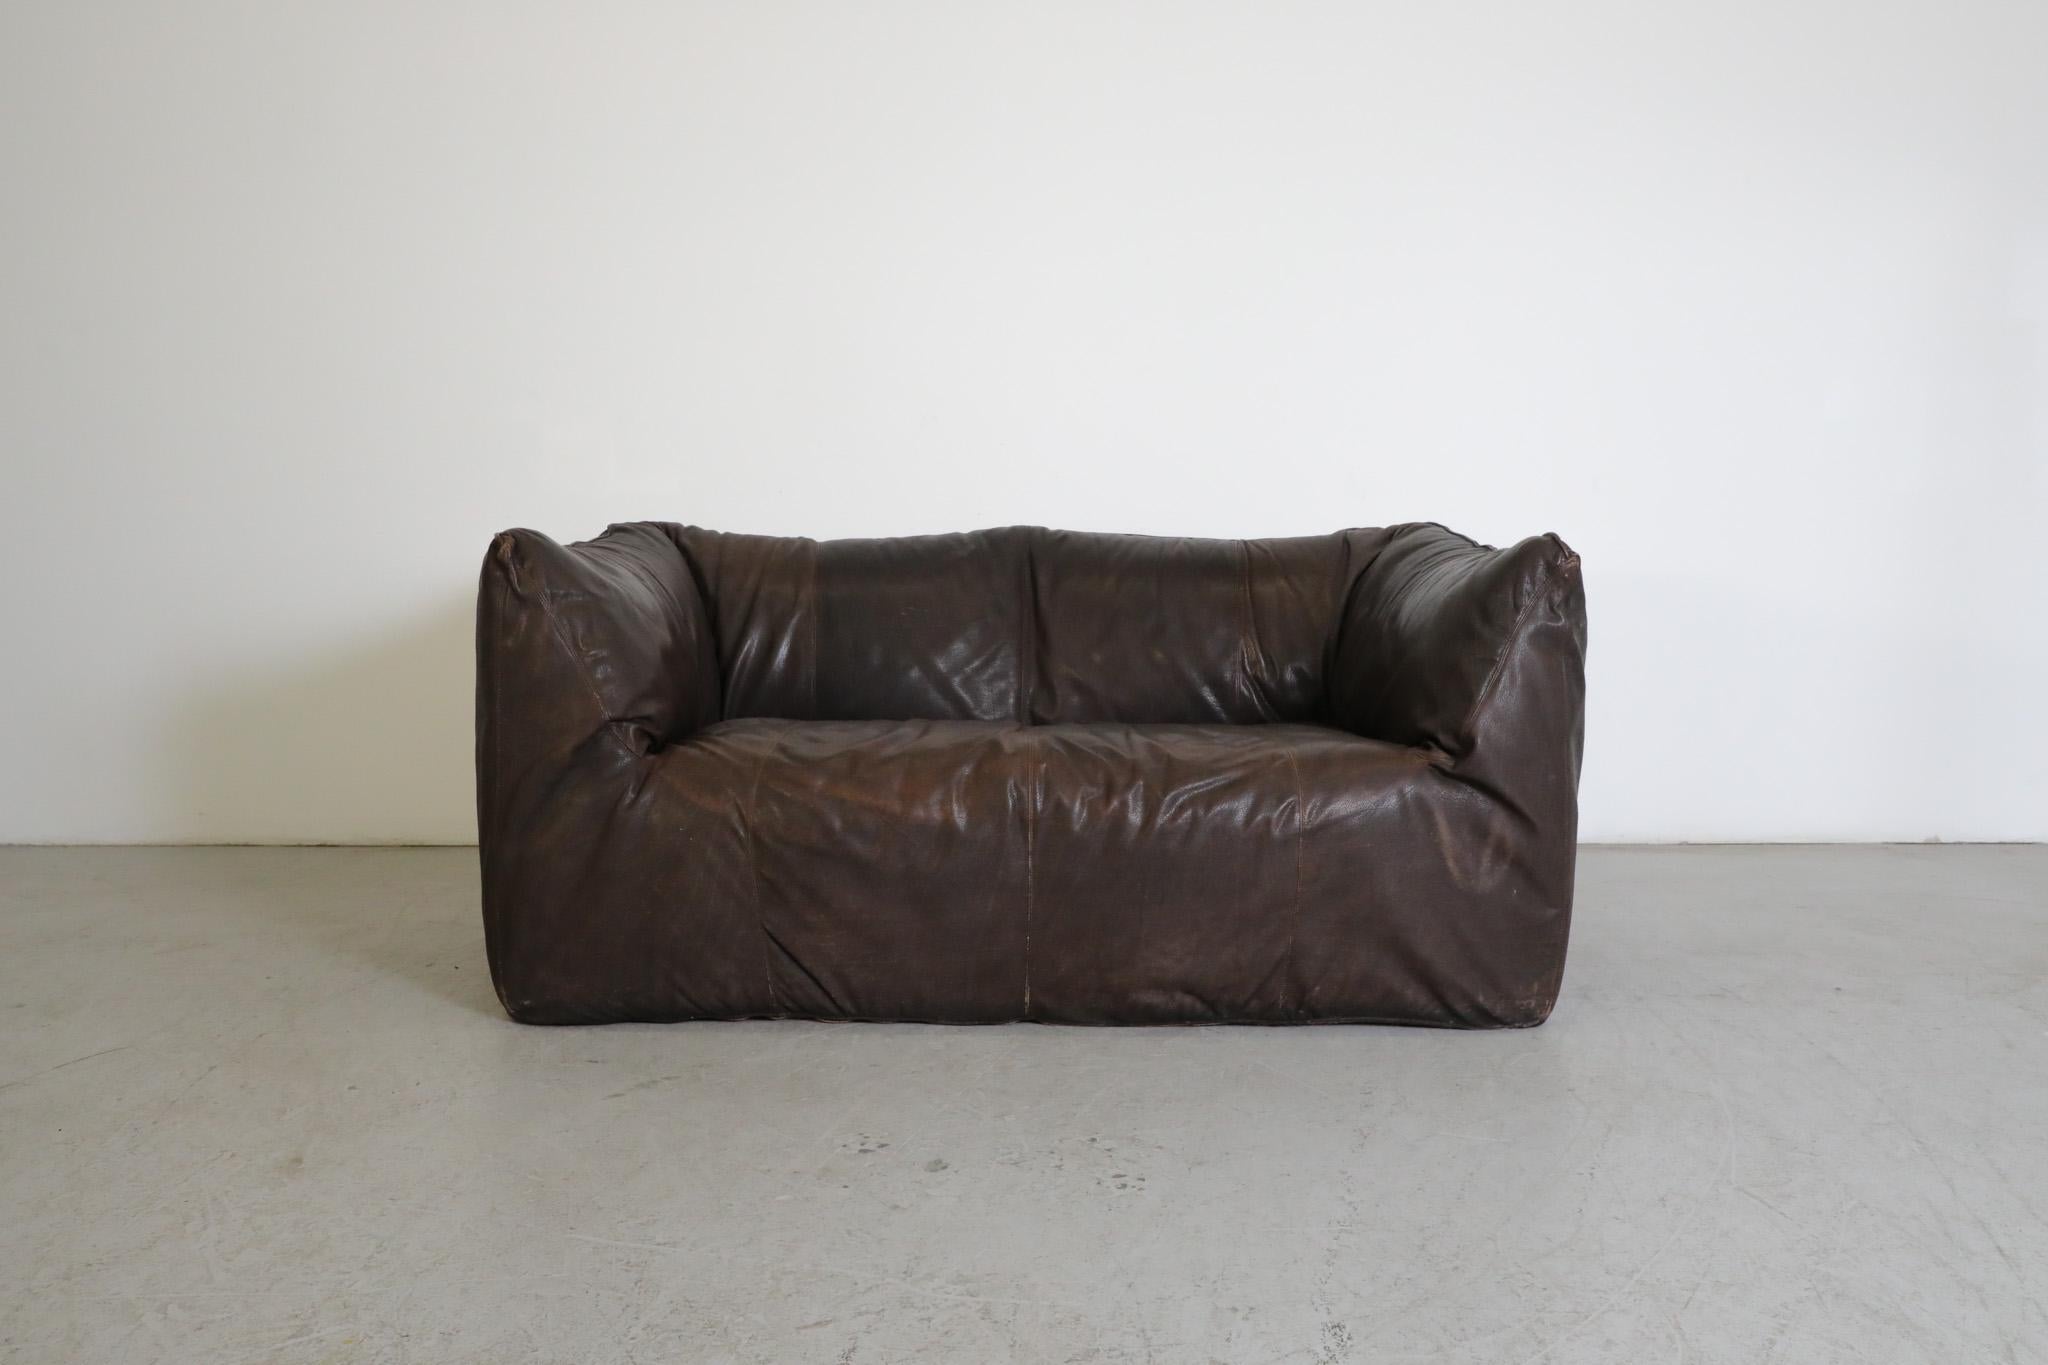 Dark brown leather soft form sofa 'Le Bambole' designed by legendary Italian designer Mario Bellini for B&B Italia, 1972 and awarded with the Compasso d'Oro in 1979. An absolute icon of timeless design, contemporary form, and luxurious comfort.